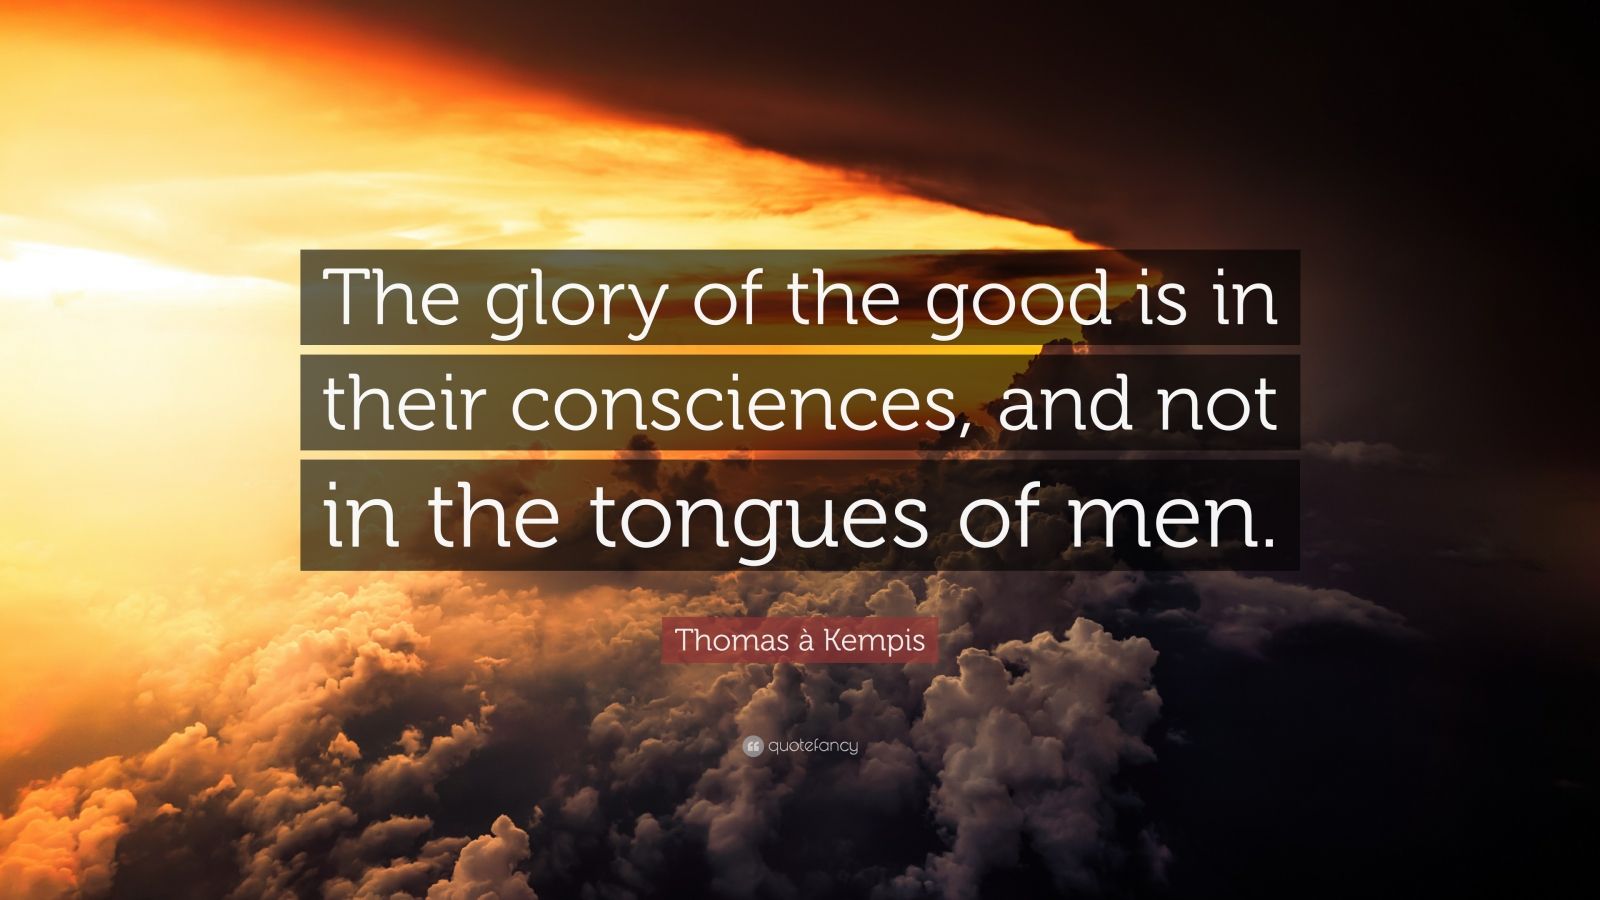 Thomas à Kempis Quote “the Glory Of The Good Is In Their Consciences